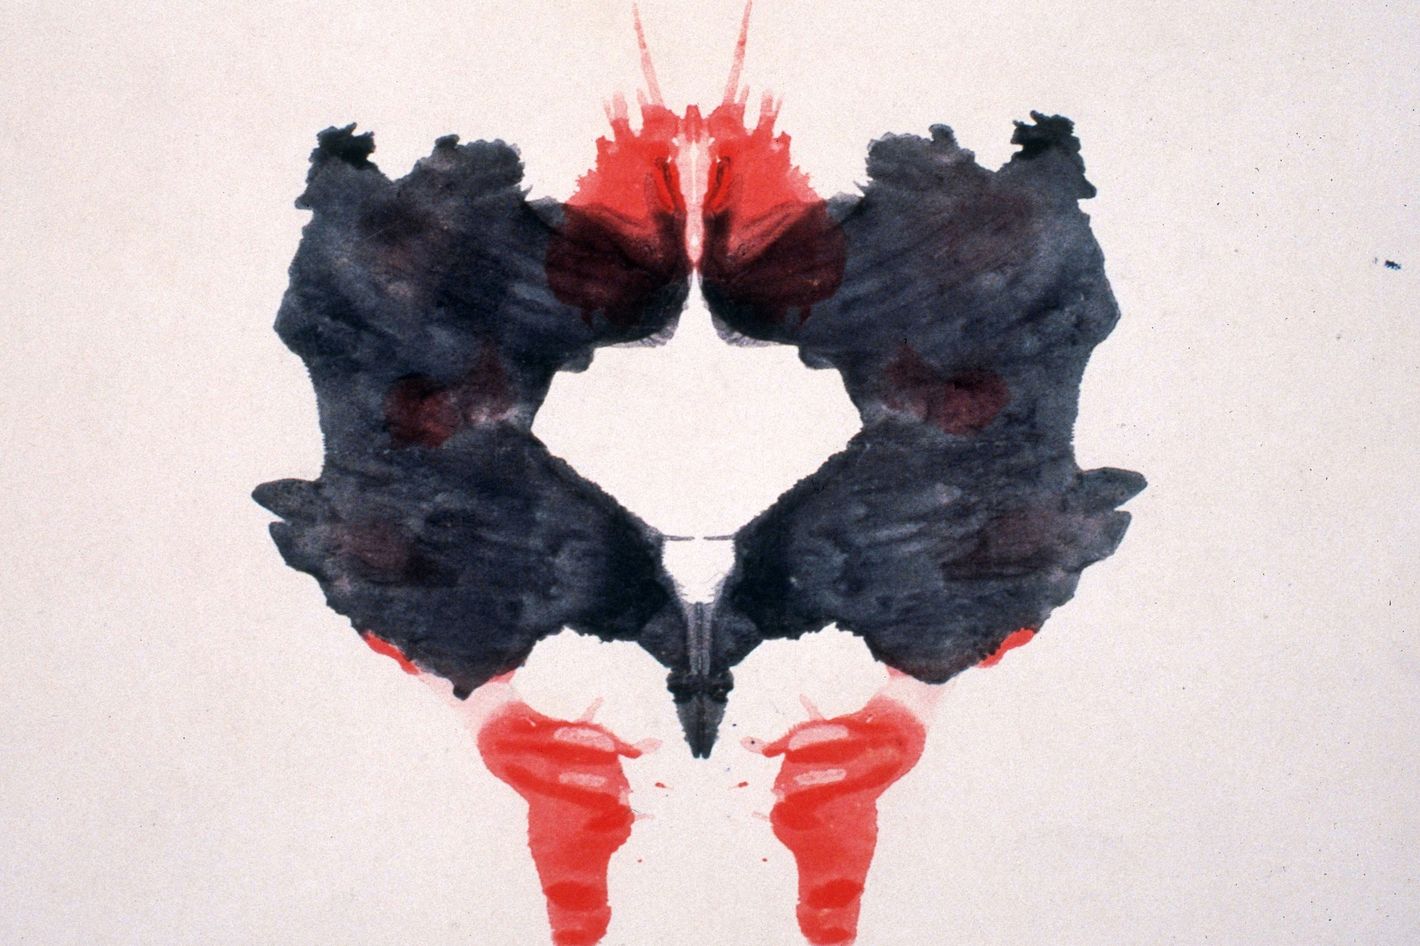 History of the Rorschach Test